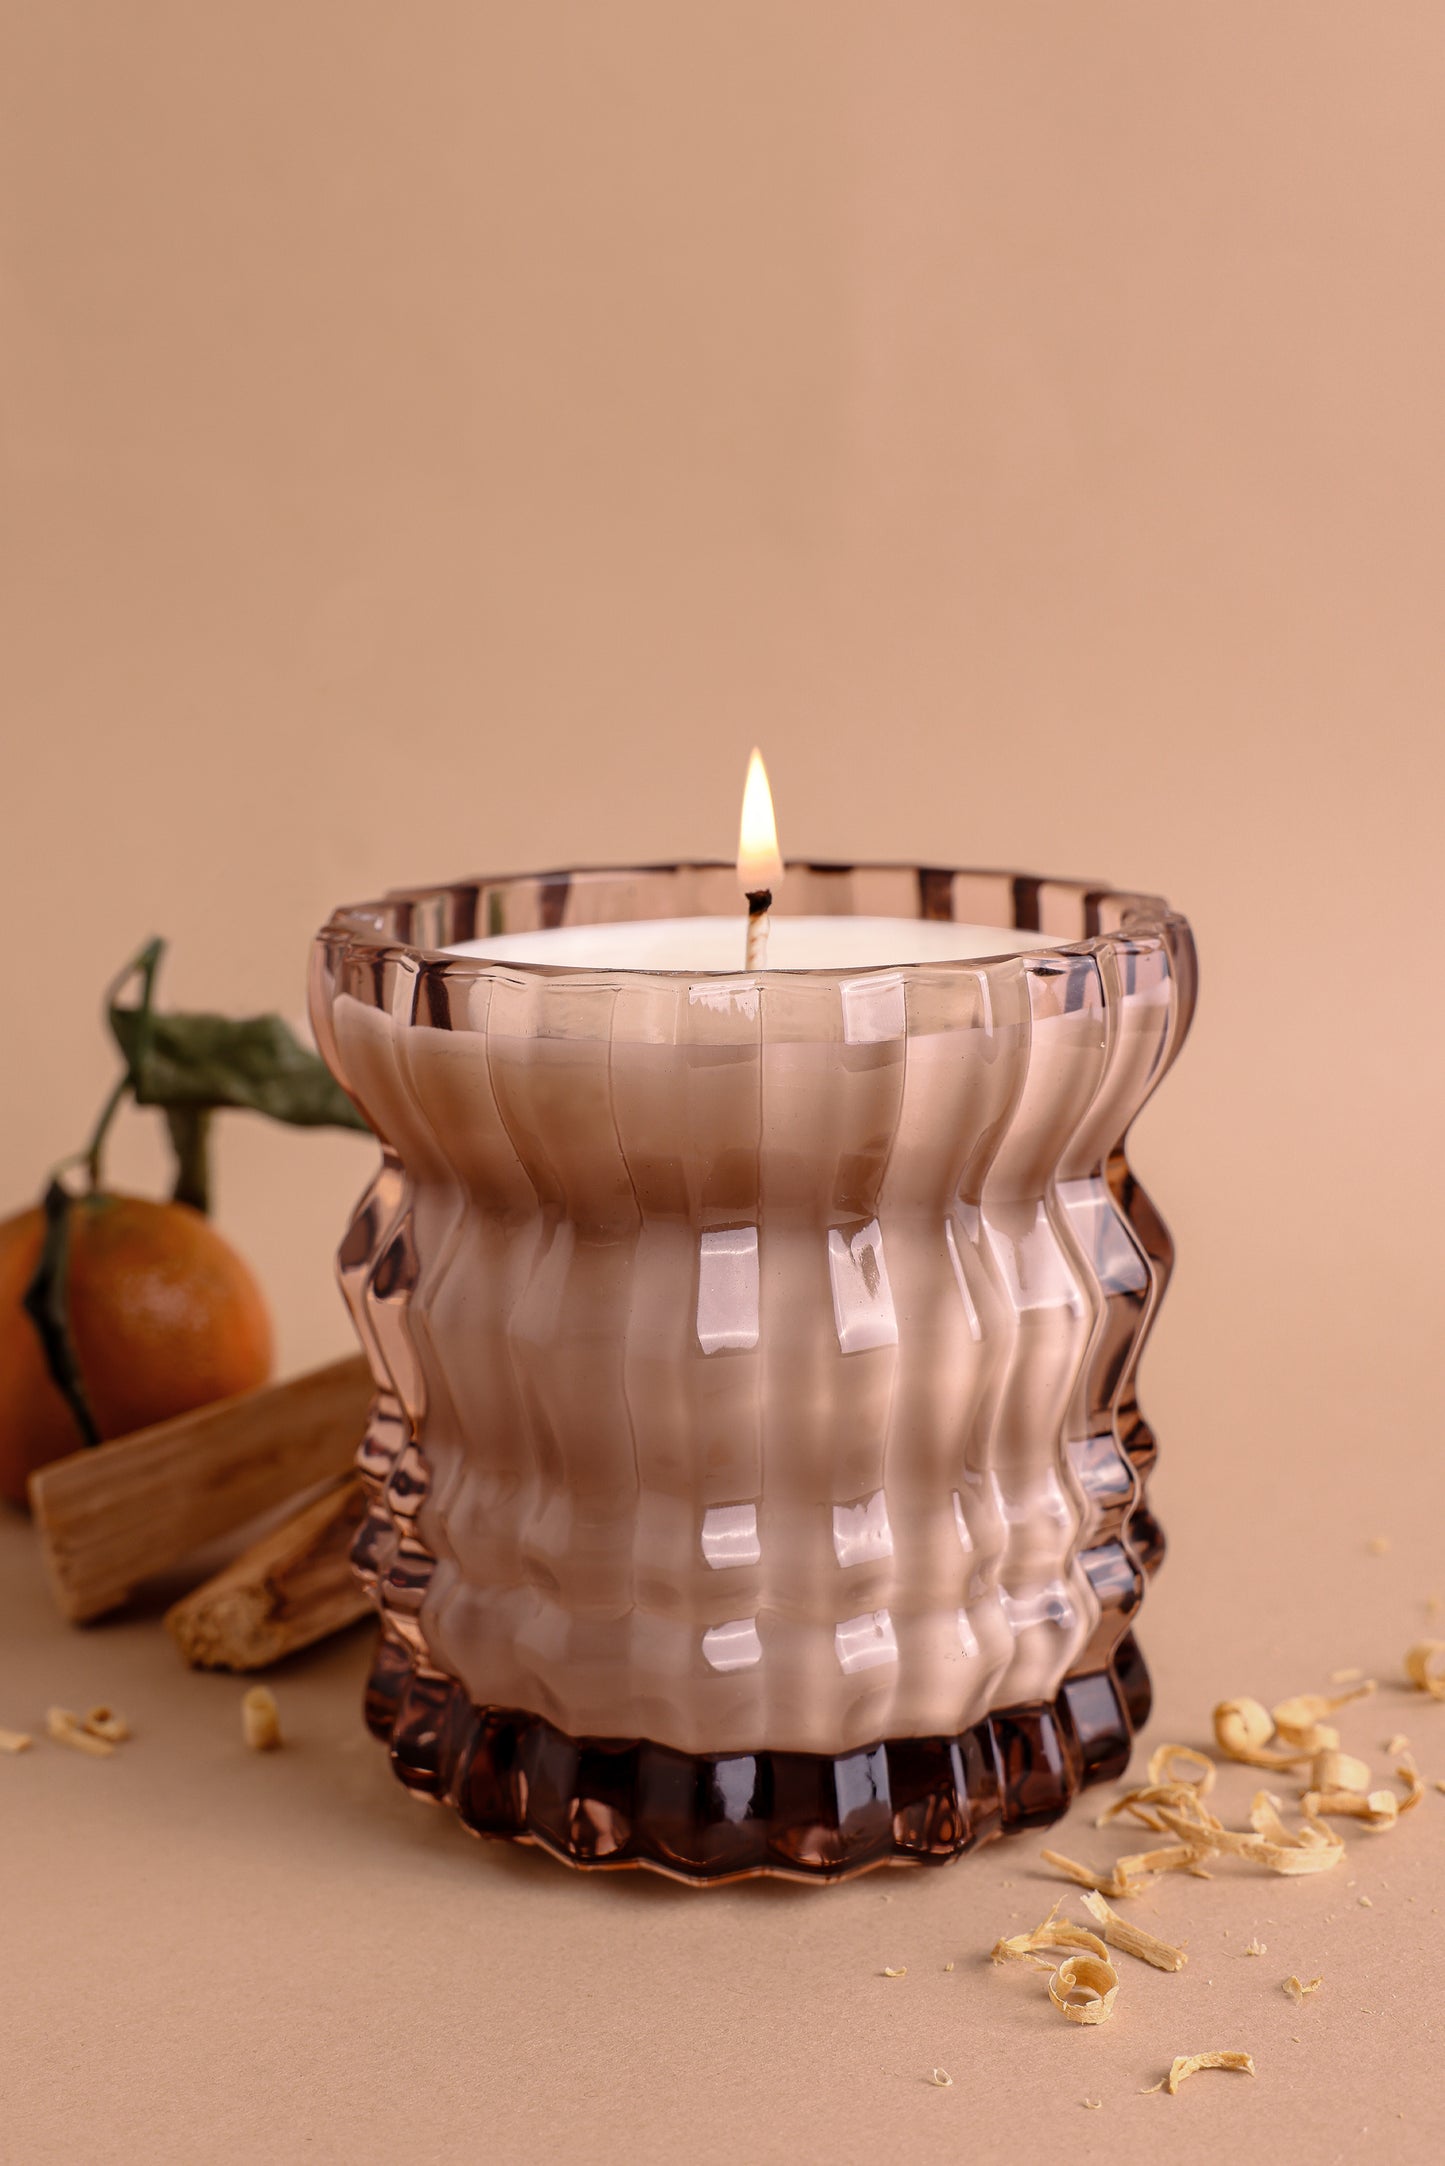 WILLOW | Non-Toxic Candle in Textured Glass Vessel